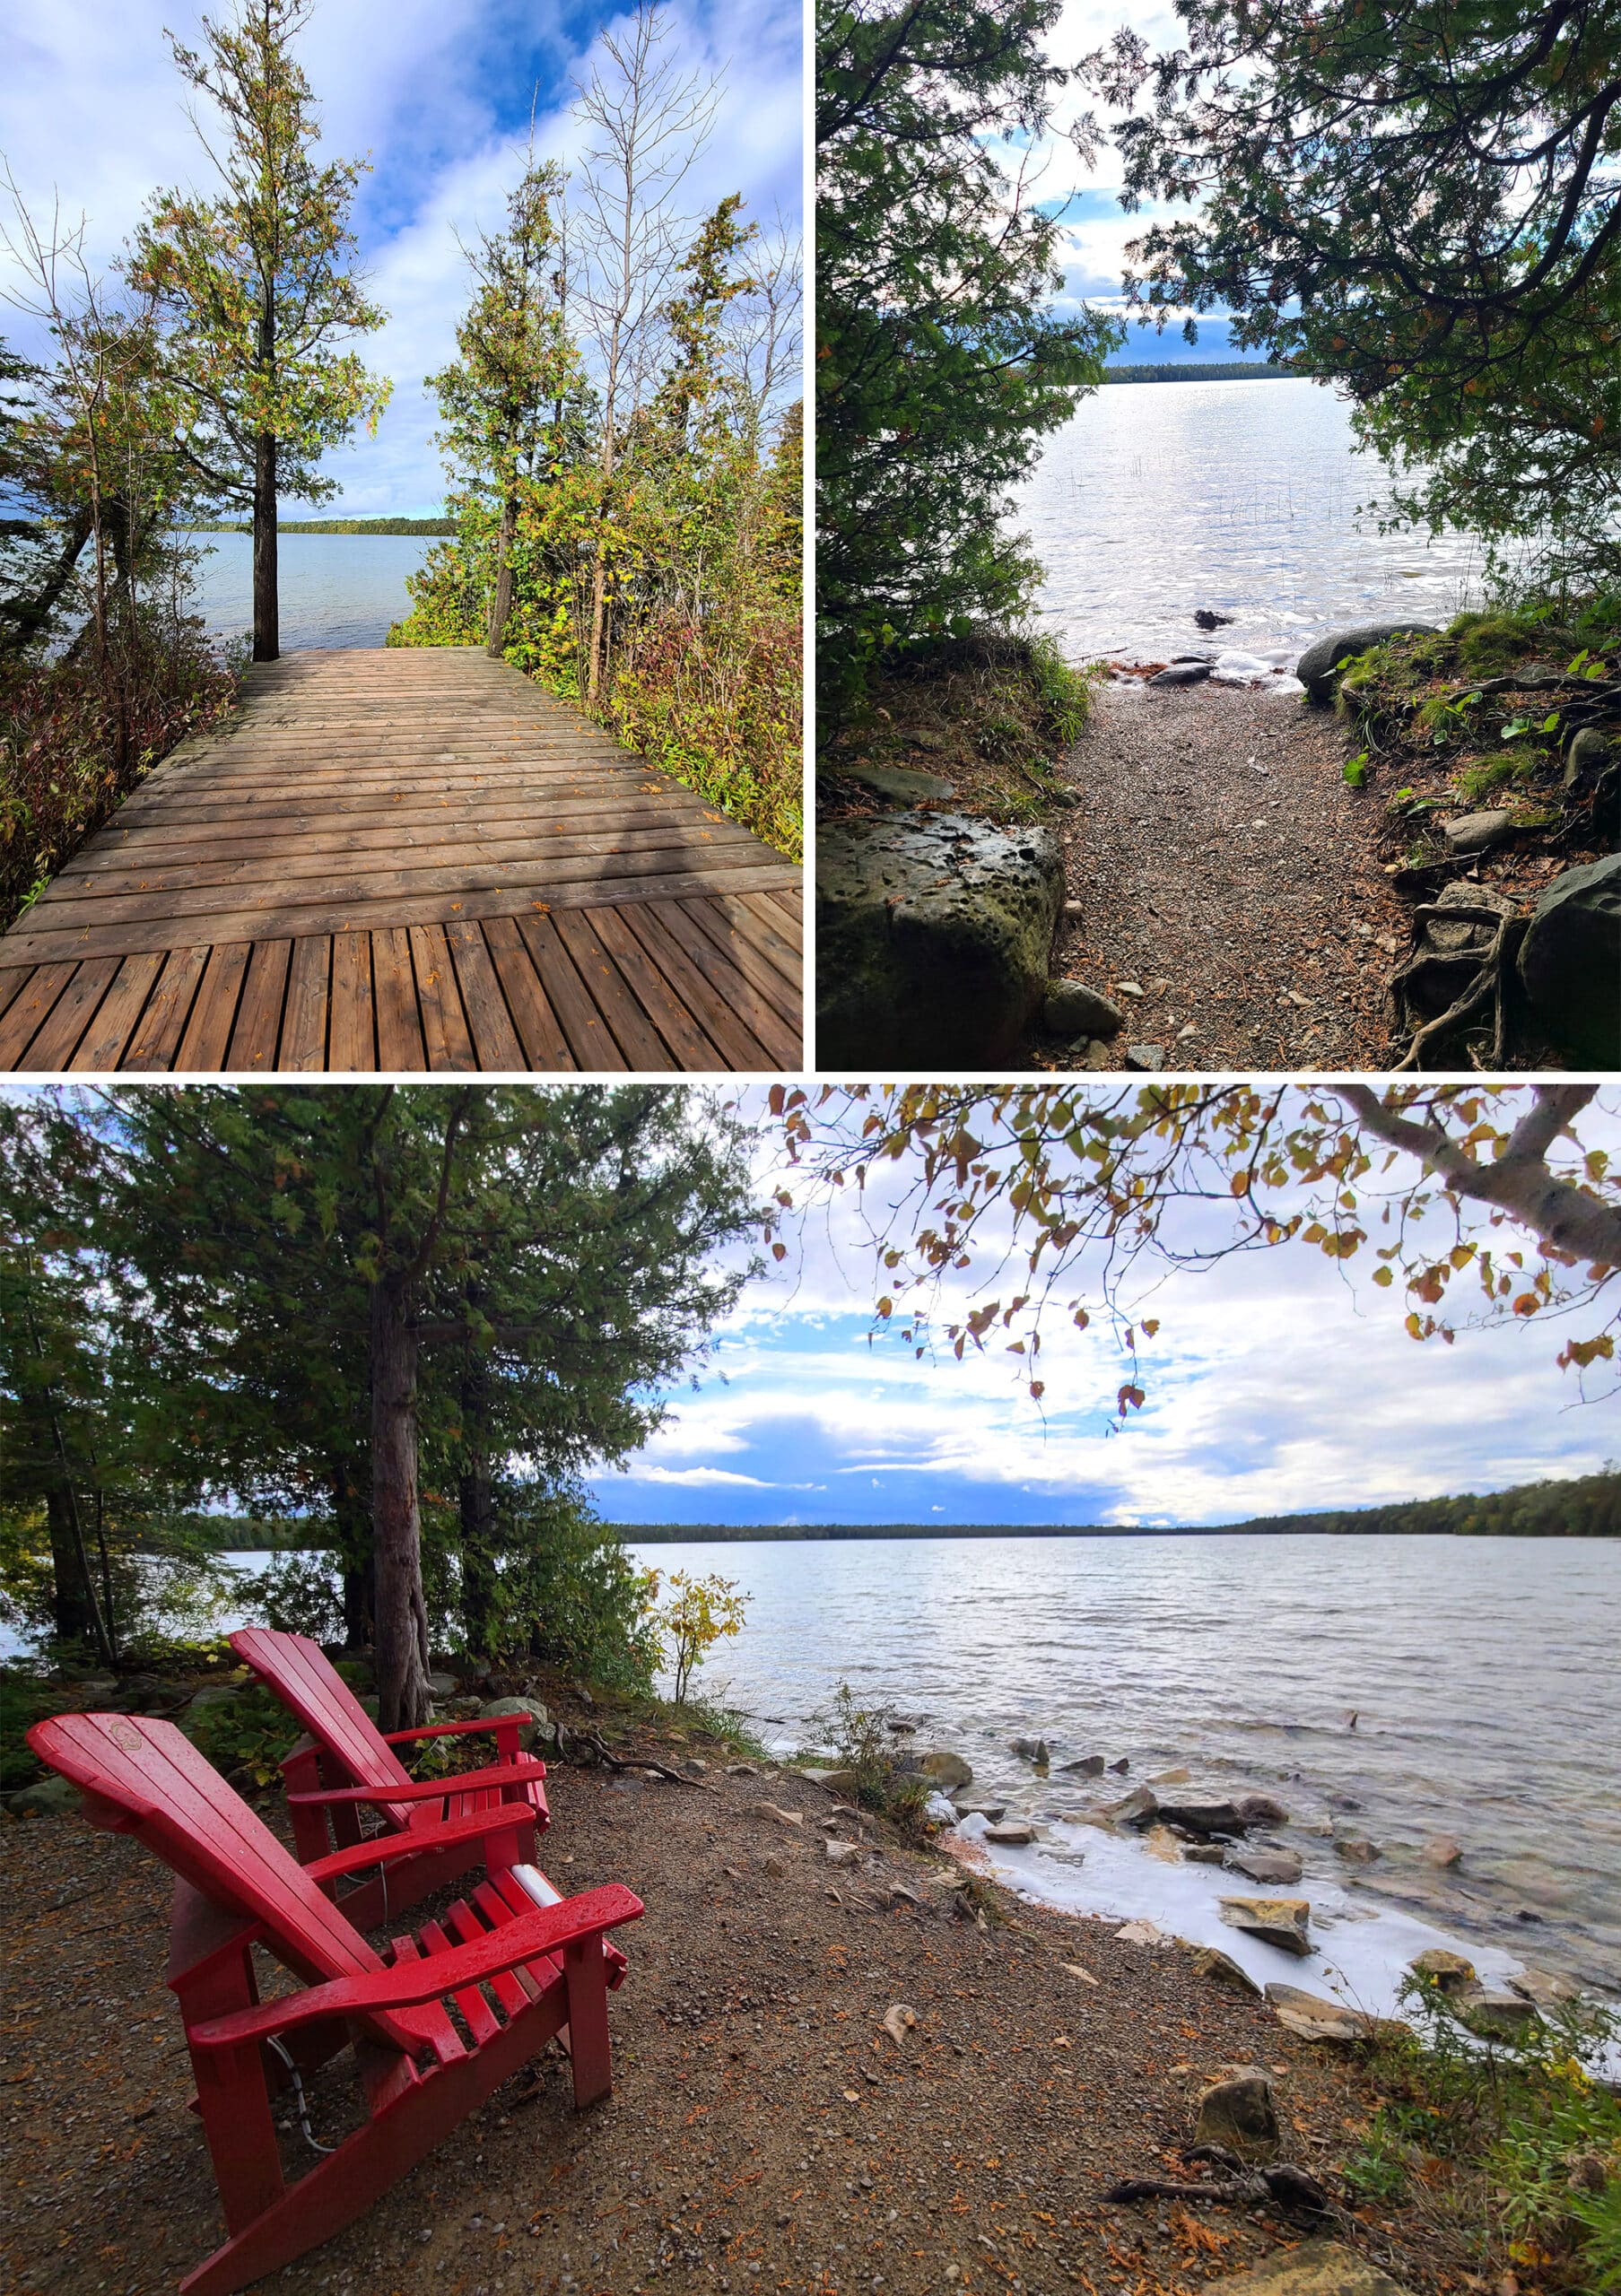 4 part image showing various views of cyprus lake trail, with a boardwalk and trees going around a small lake.